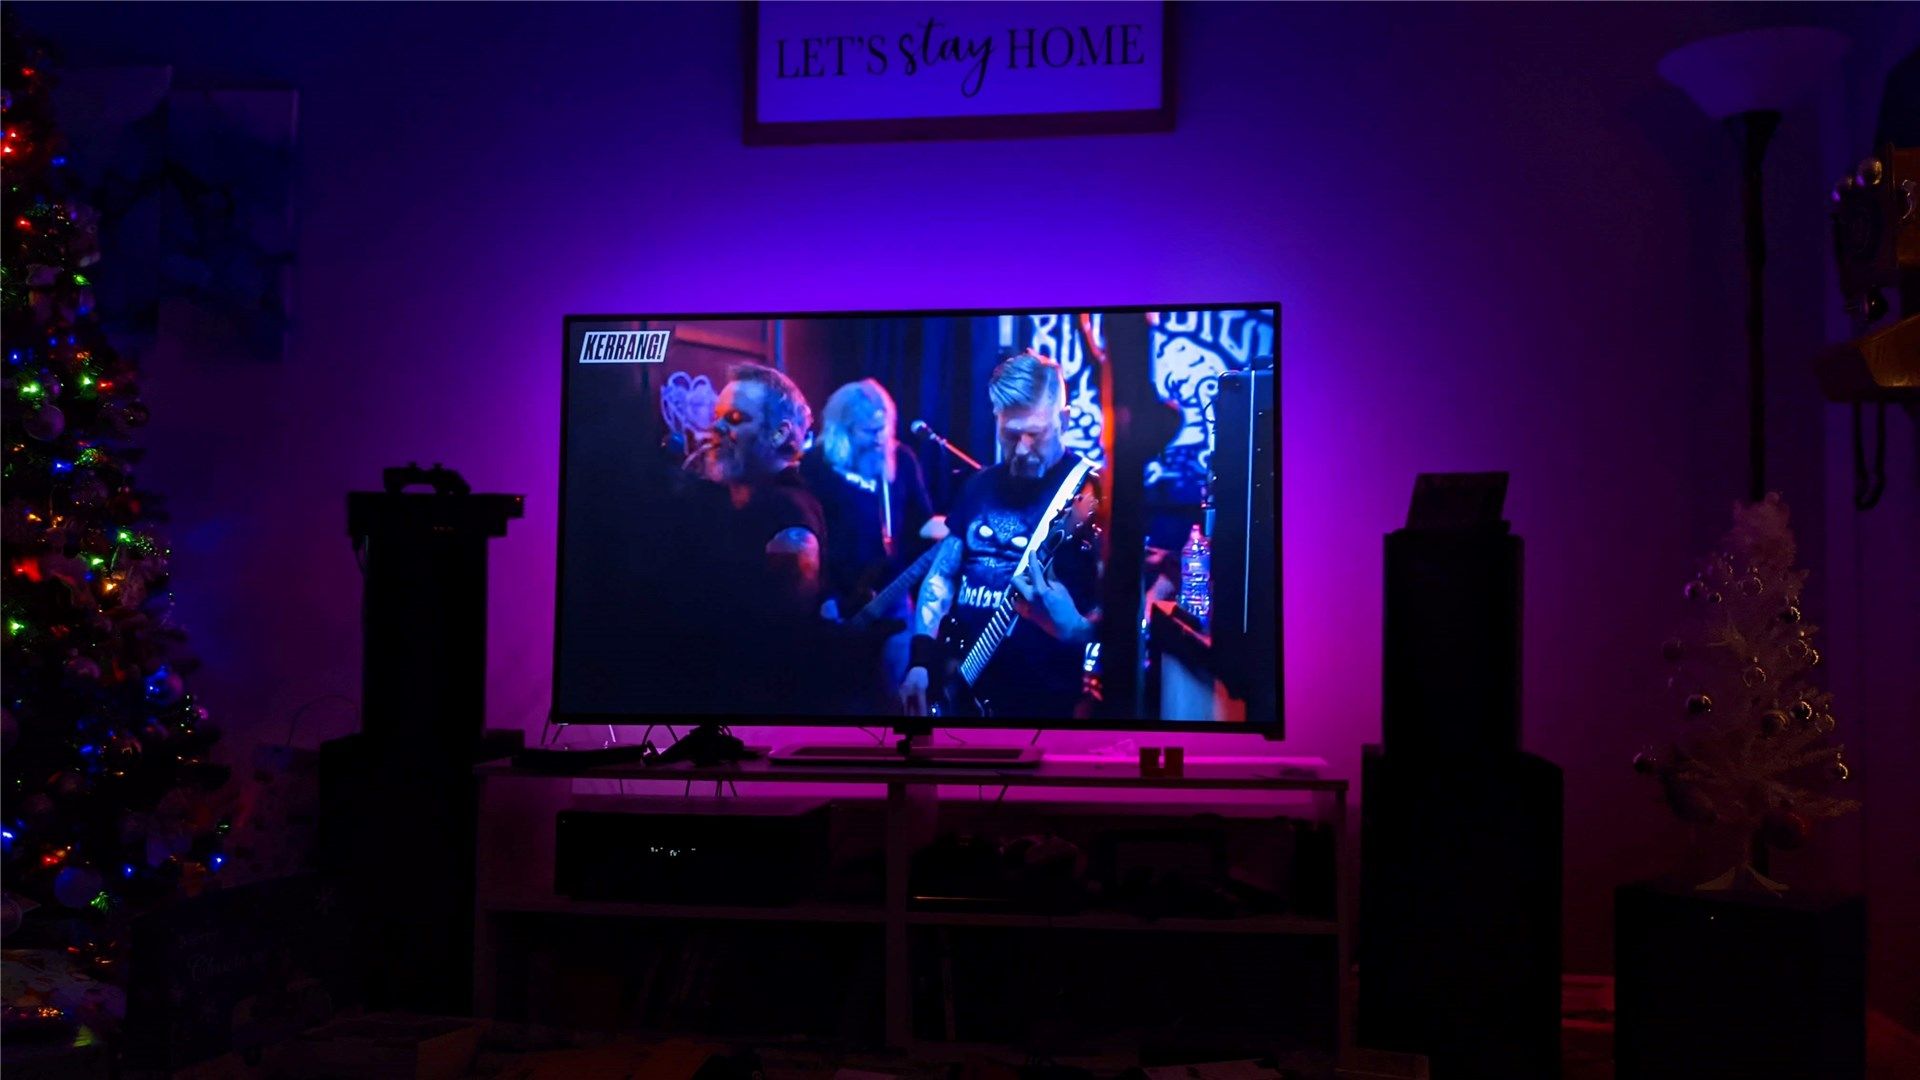 The Immersion glowing blue, purple, and pink behind a TV showing a live concert